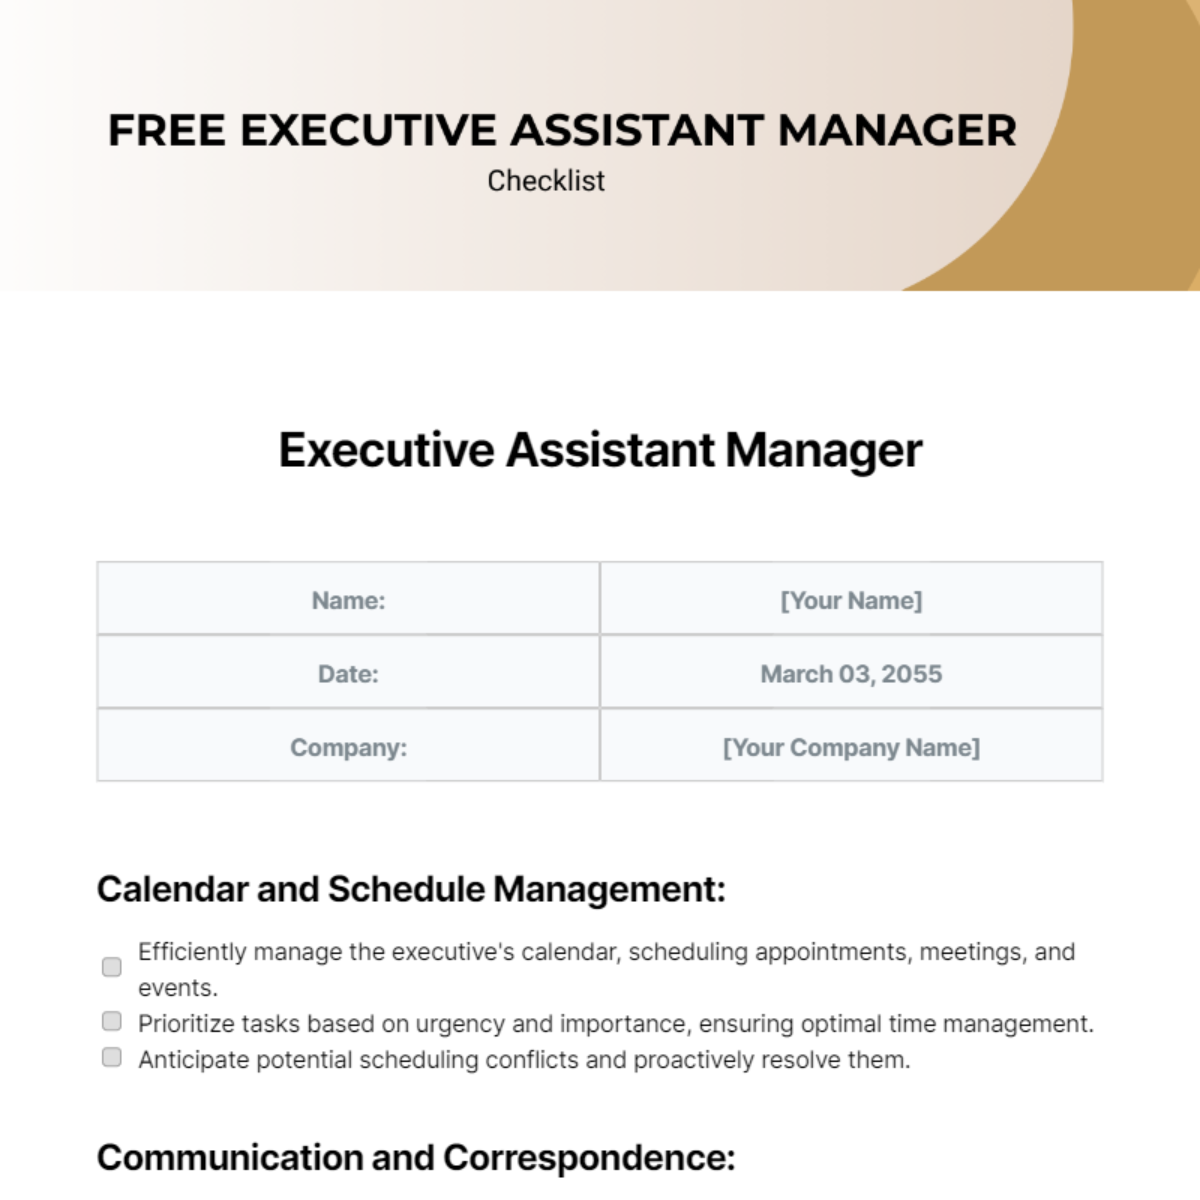 Executive Assistant Manager Checklist Template